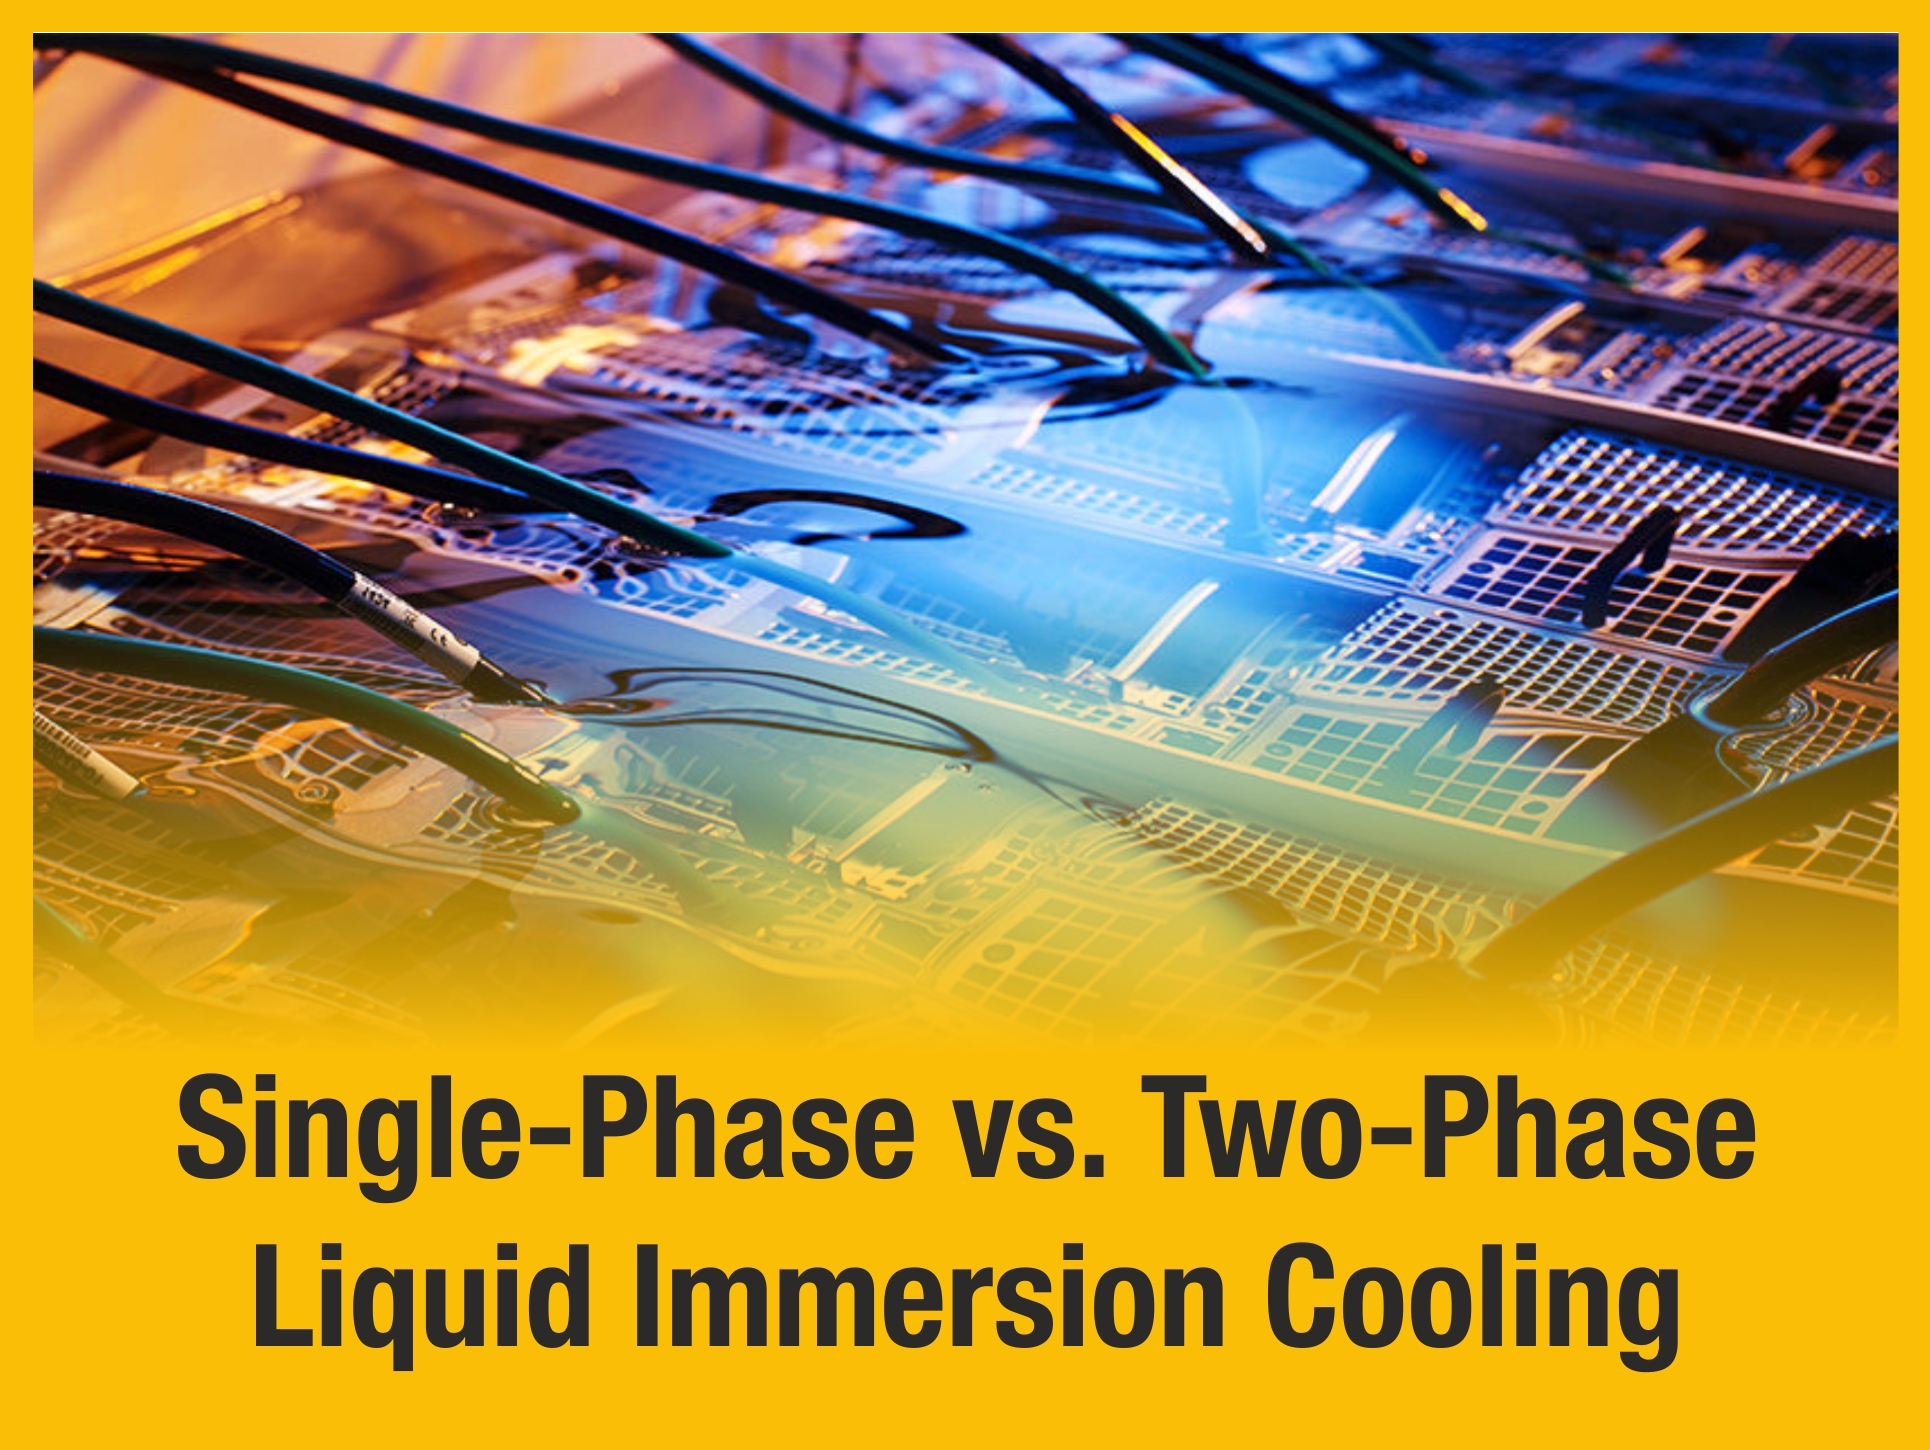 Infographic – Single-Phase vs. Two-Phase Liquid Immersion Cooling